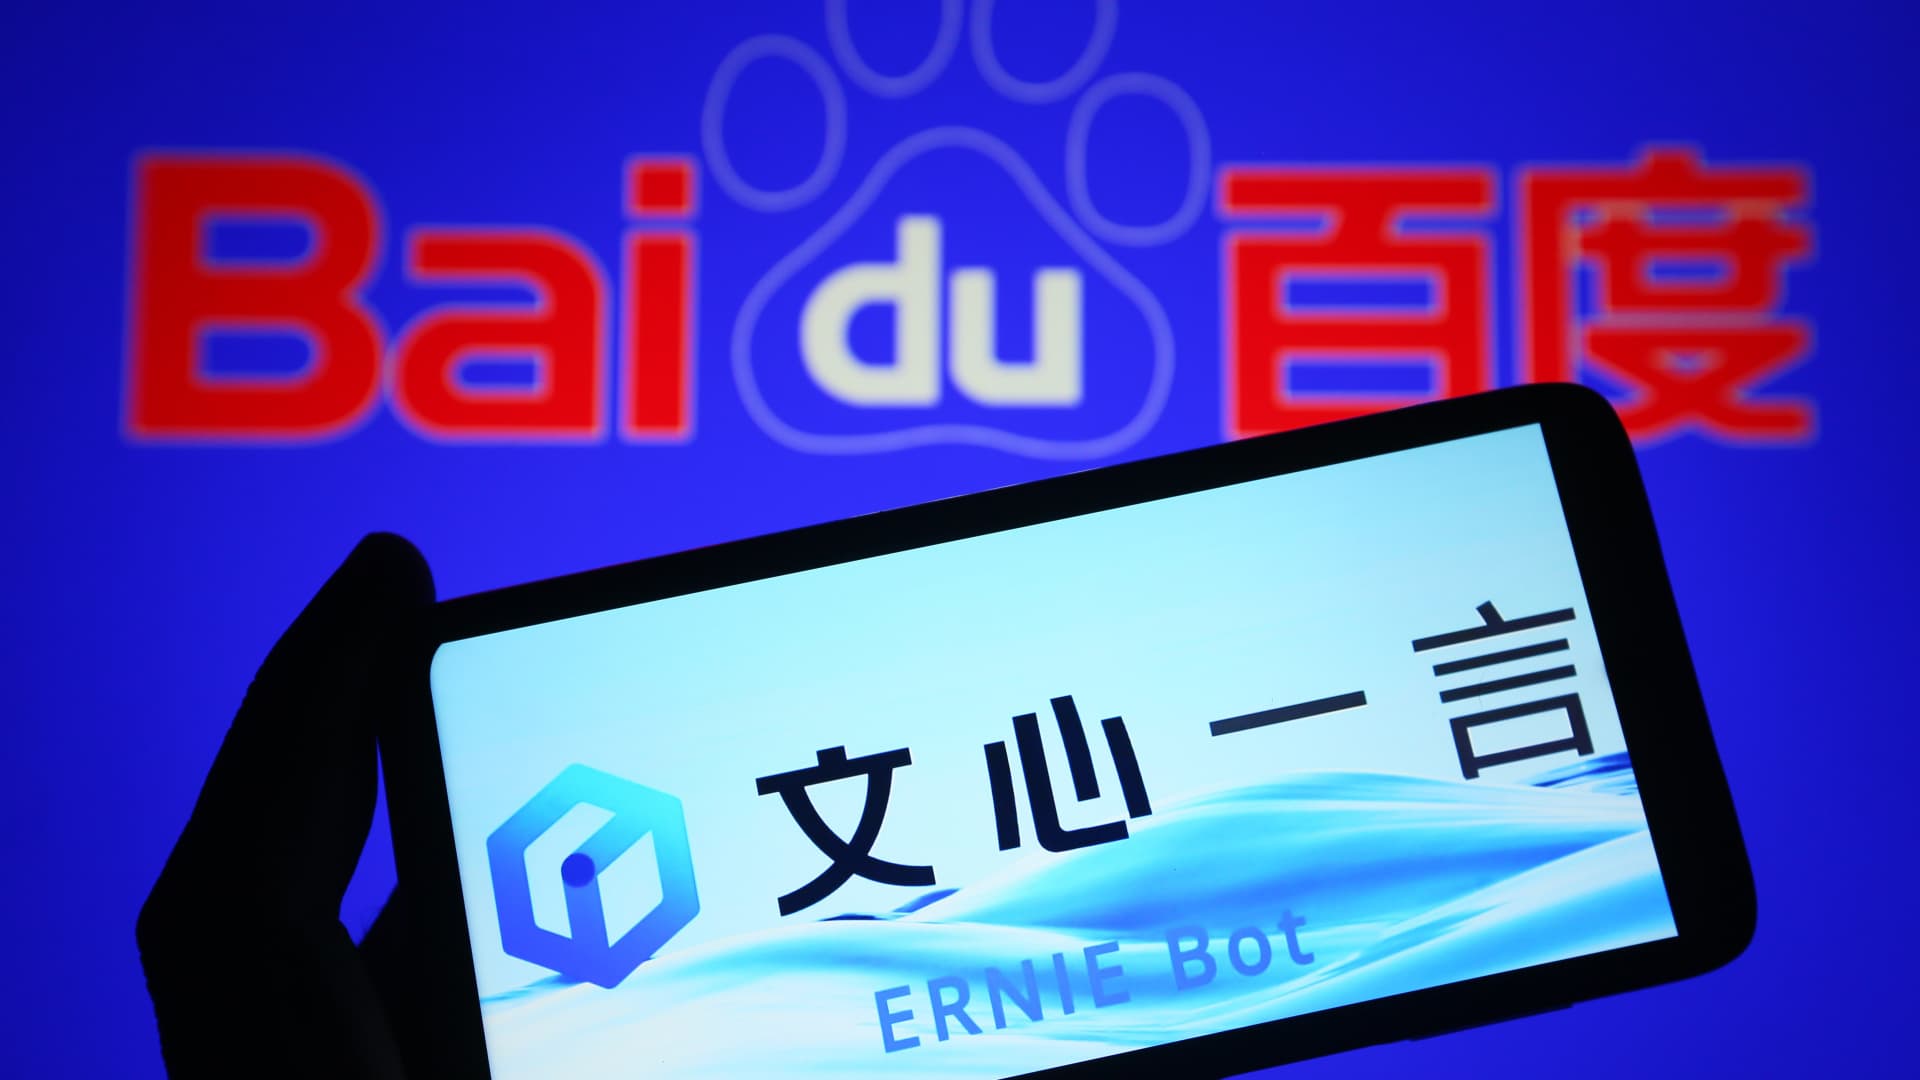 Baidu revenue grows 6% in fourth quarter as AI and advertising boost business - CNBC